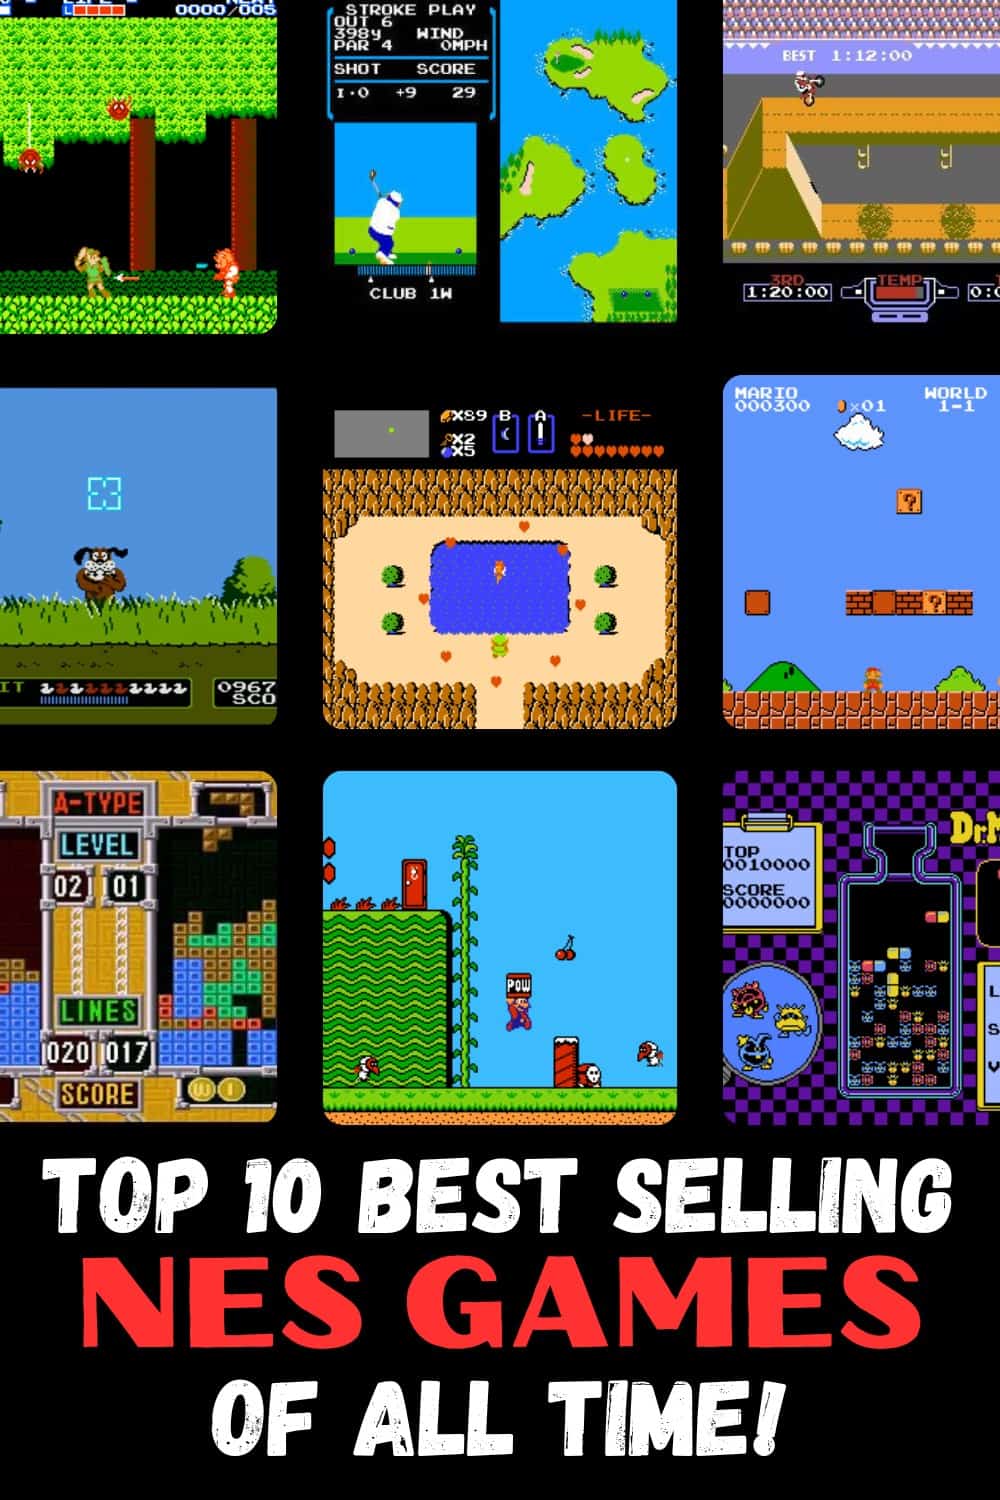 List of Best Selling Nintendo Entertainment System Games